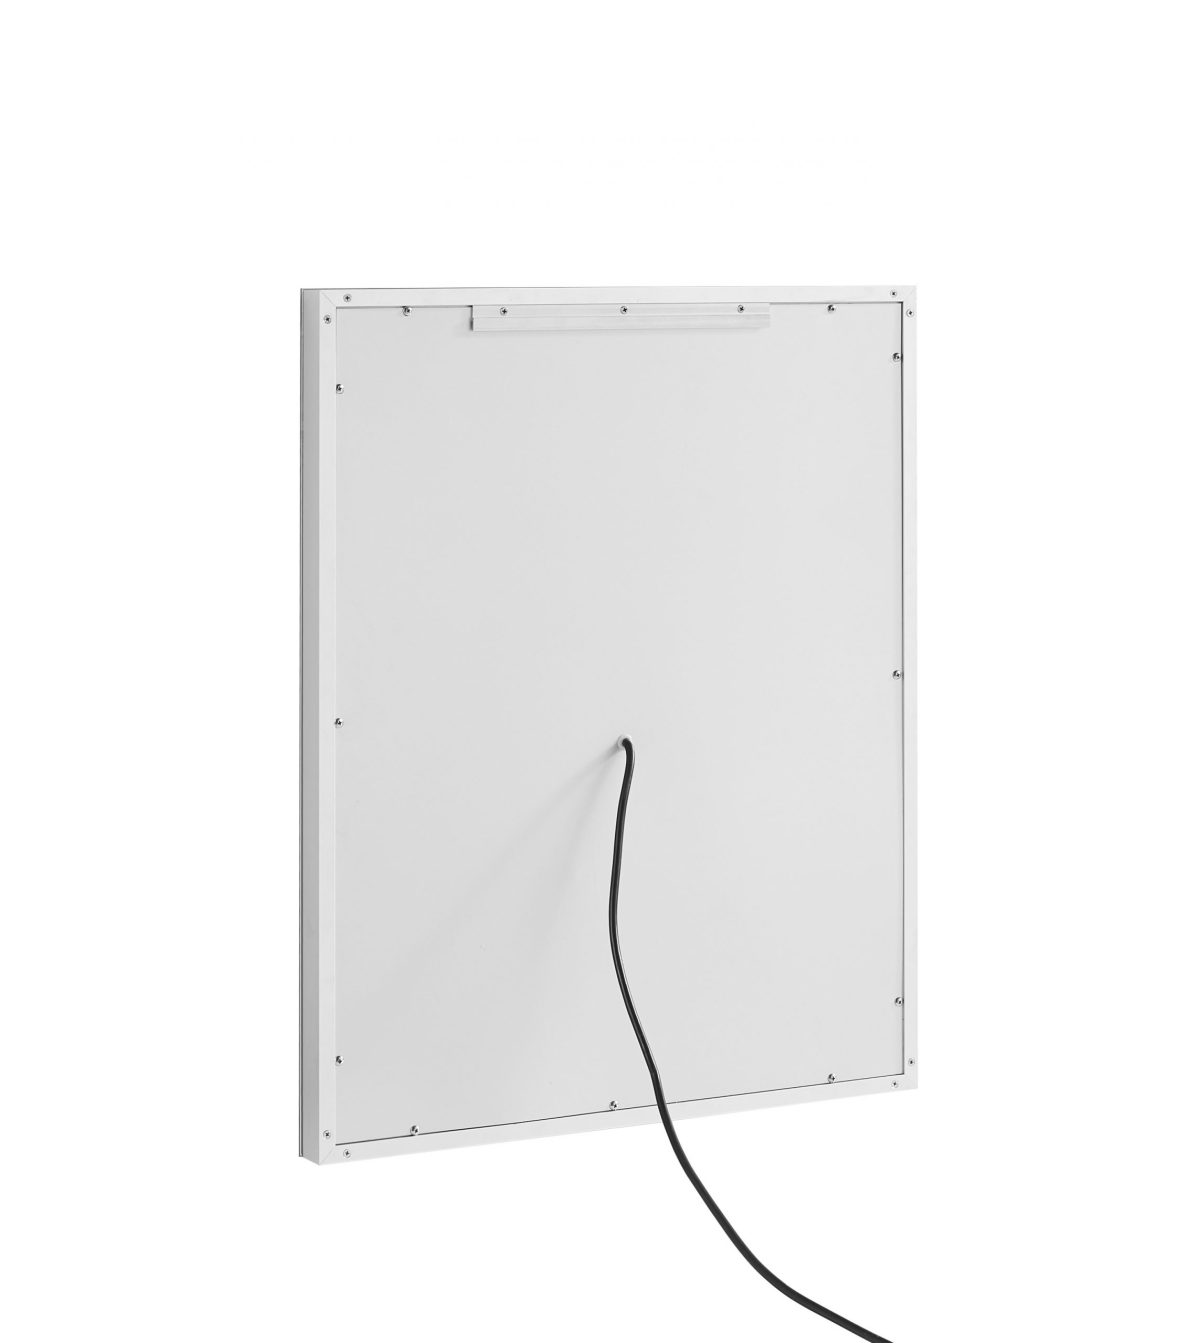 AQUADOM Daytona 36 inches x 36 inches Wall Mounted LED Lighted Silver Mirror for Bathroom